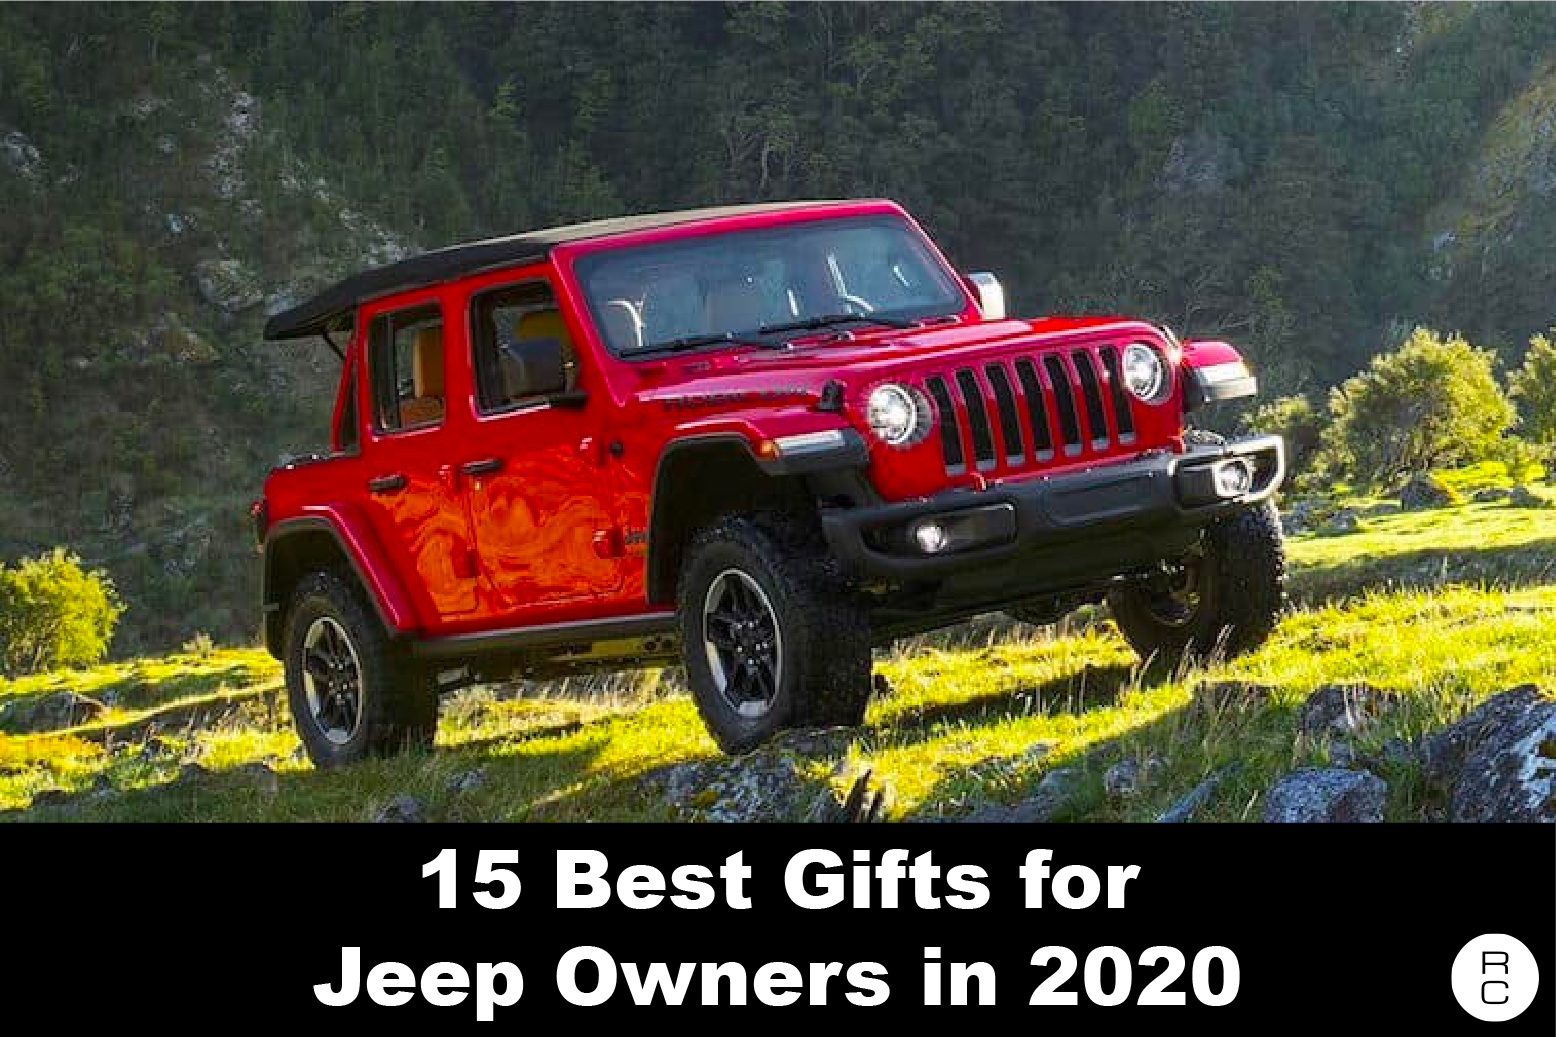 The 15 Best Gifts For Jeep Owners in 2020